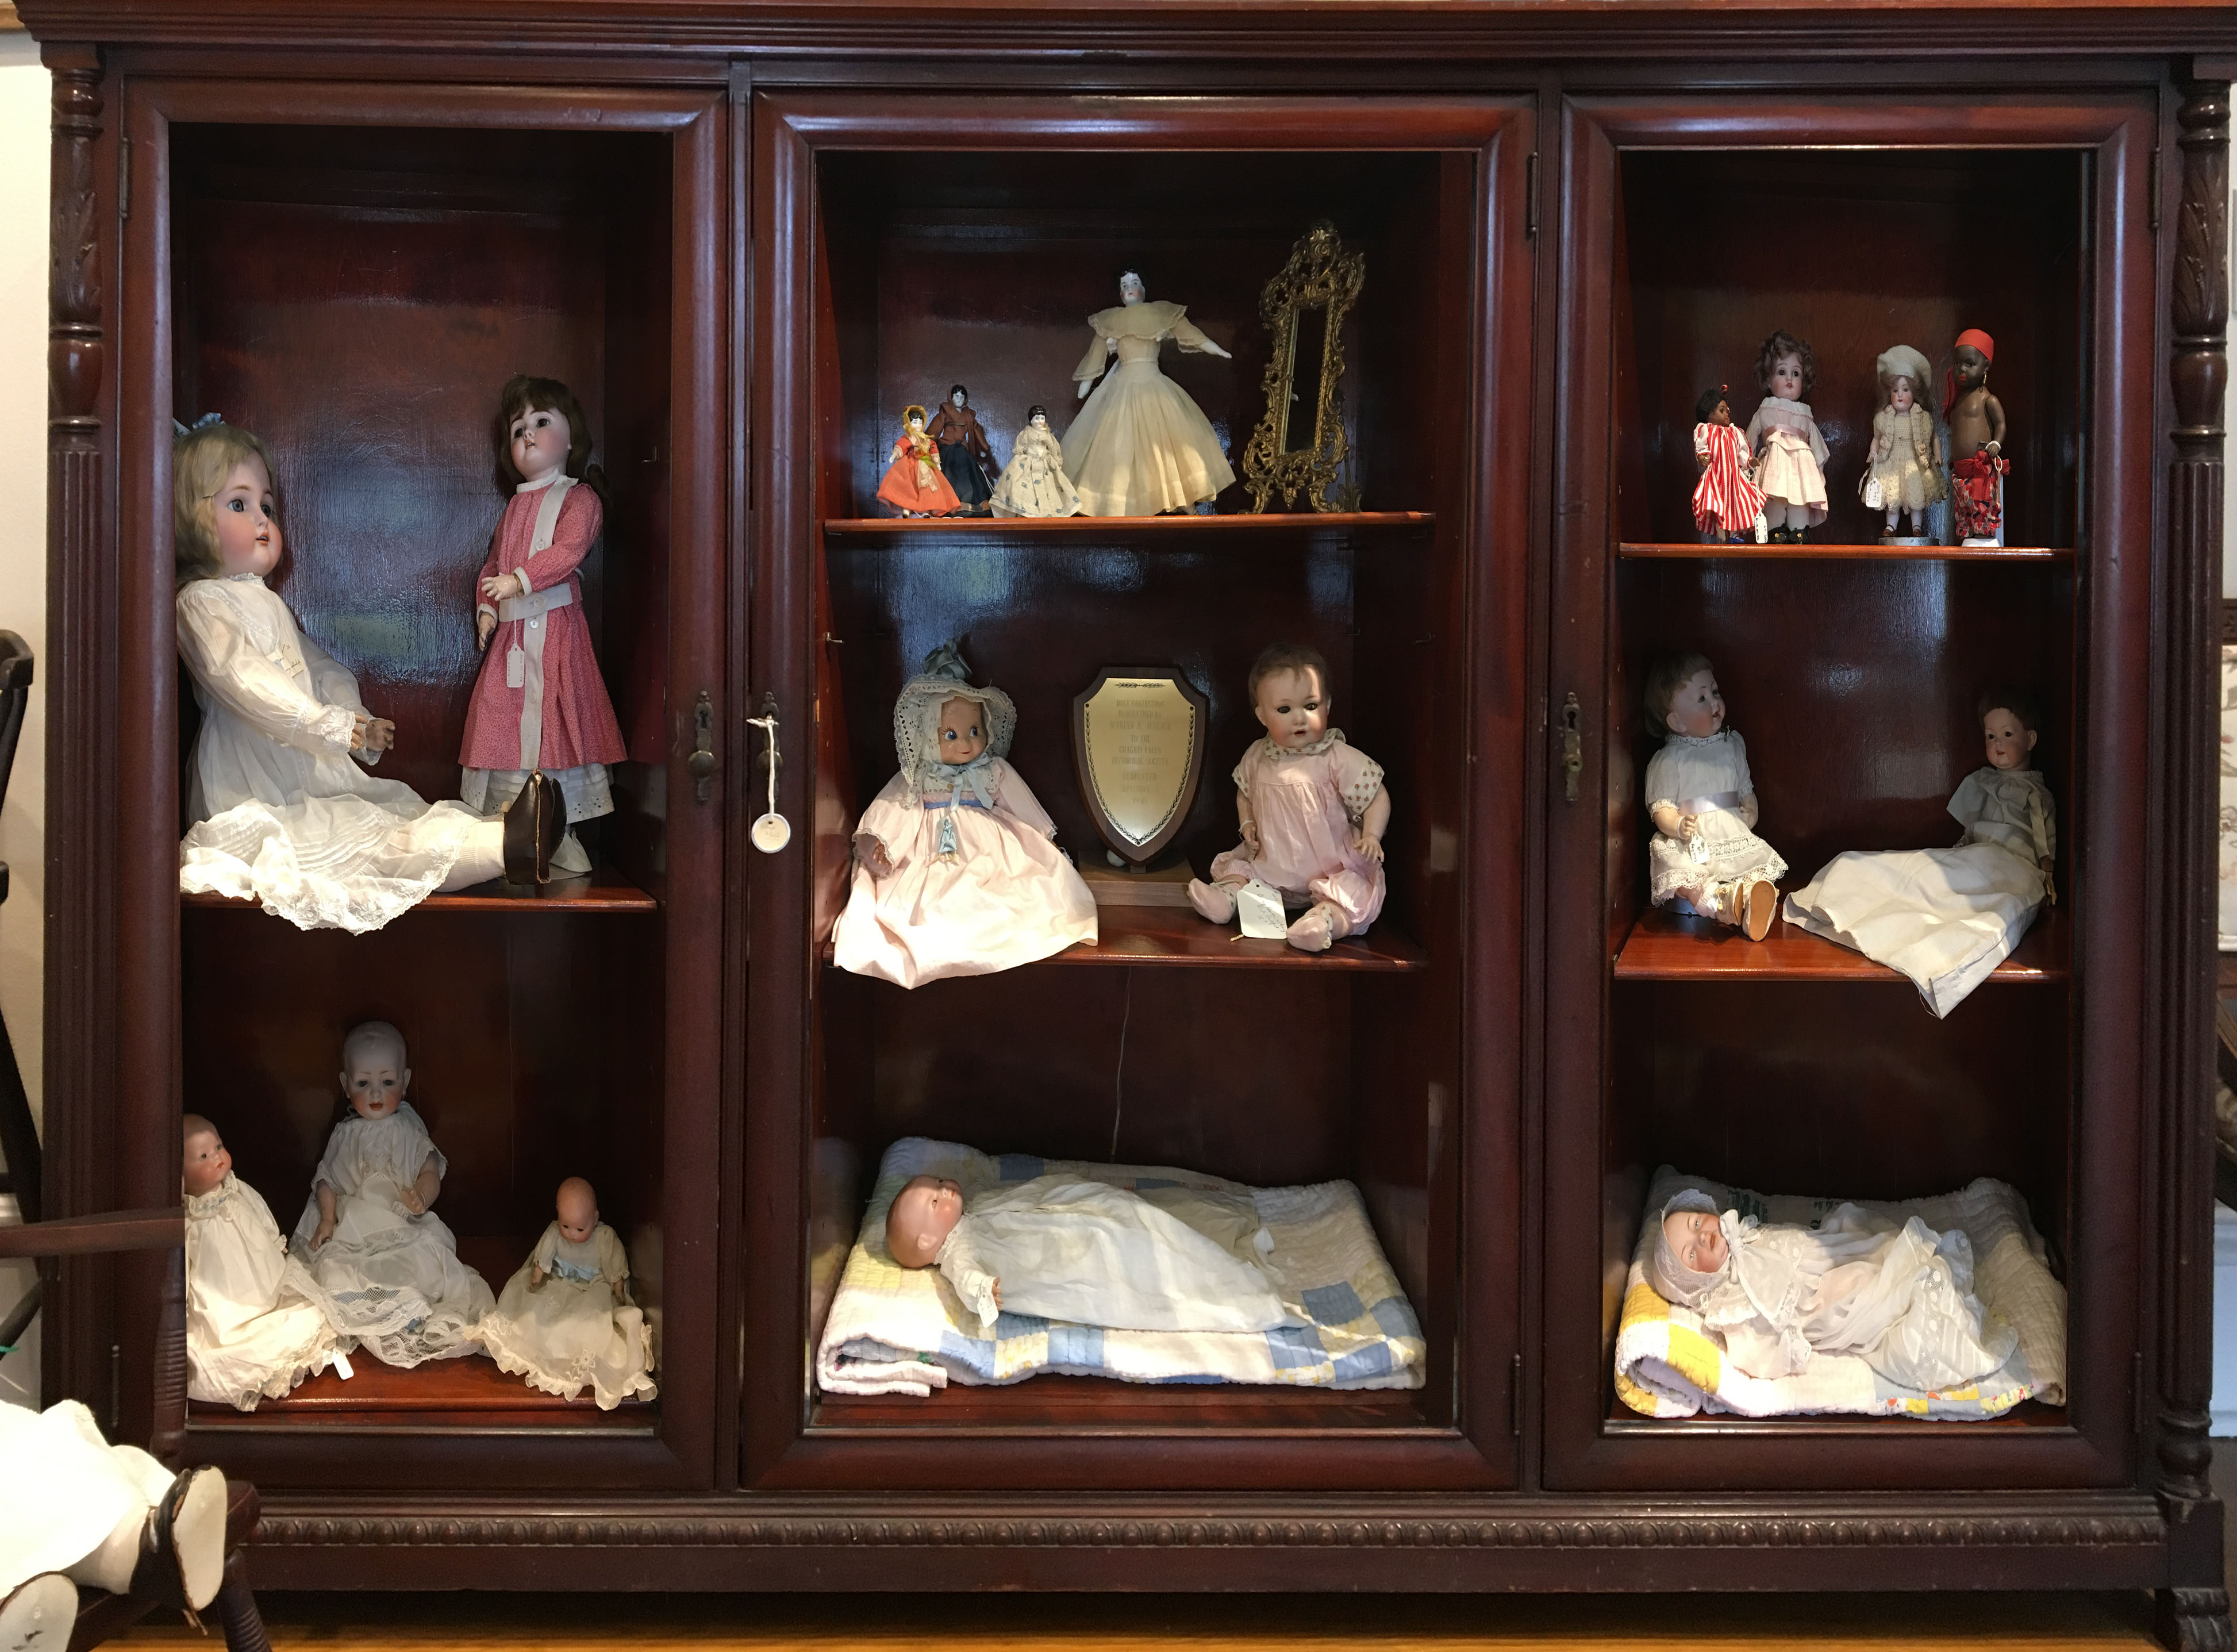 Start an Antique Doll Collection